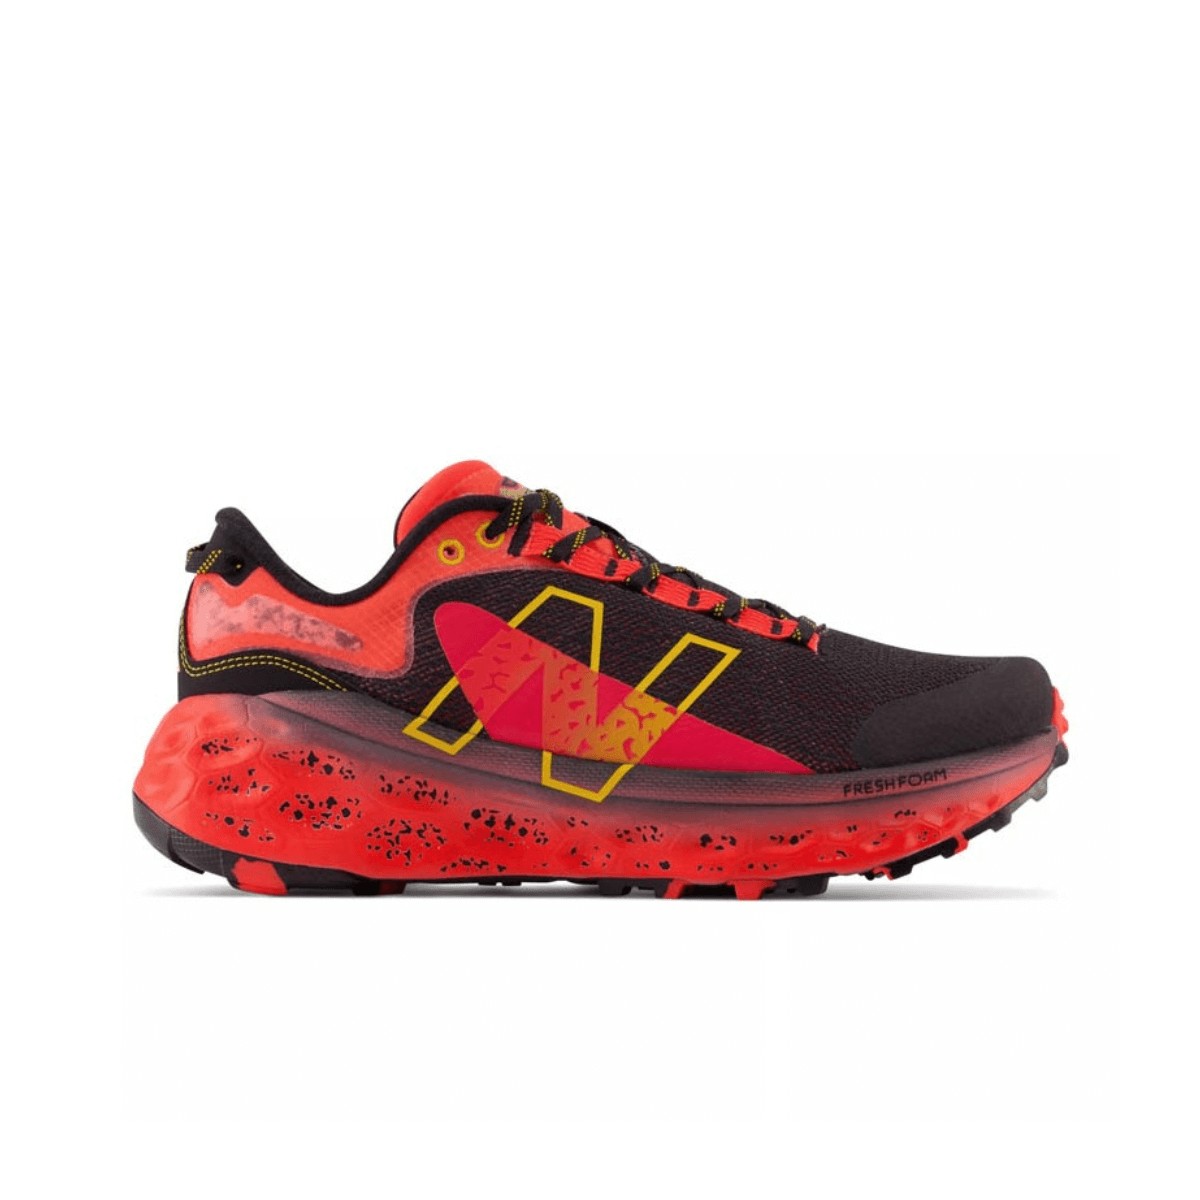 Chaussures New Balance Fresh Foam More Trail v2 Rouge Noir AW22, Taille 42 - EUR